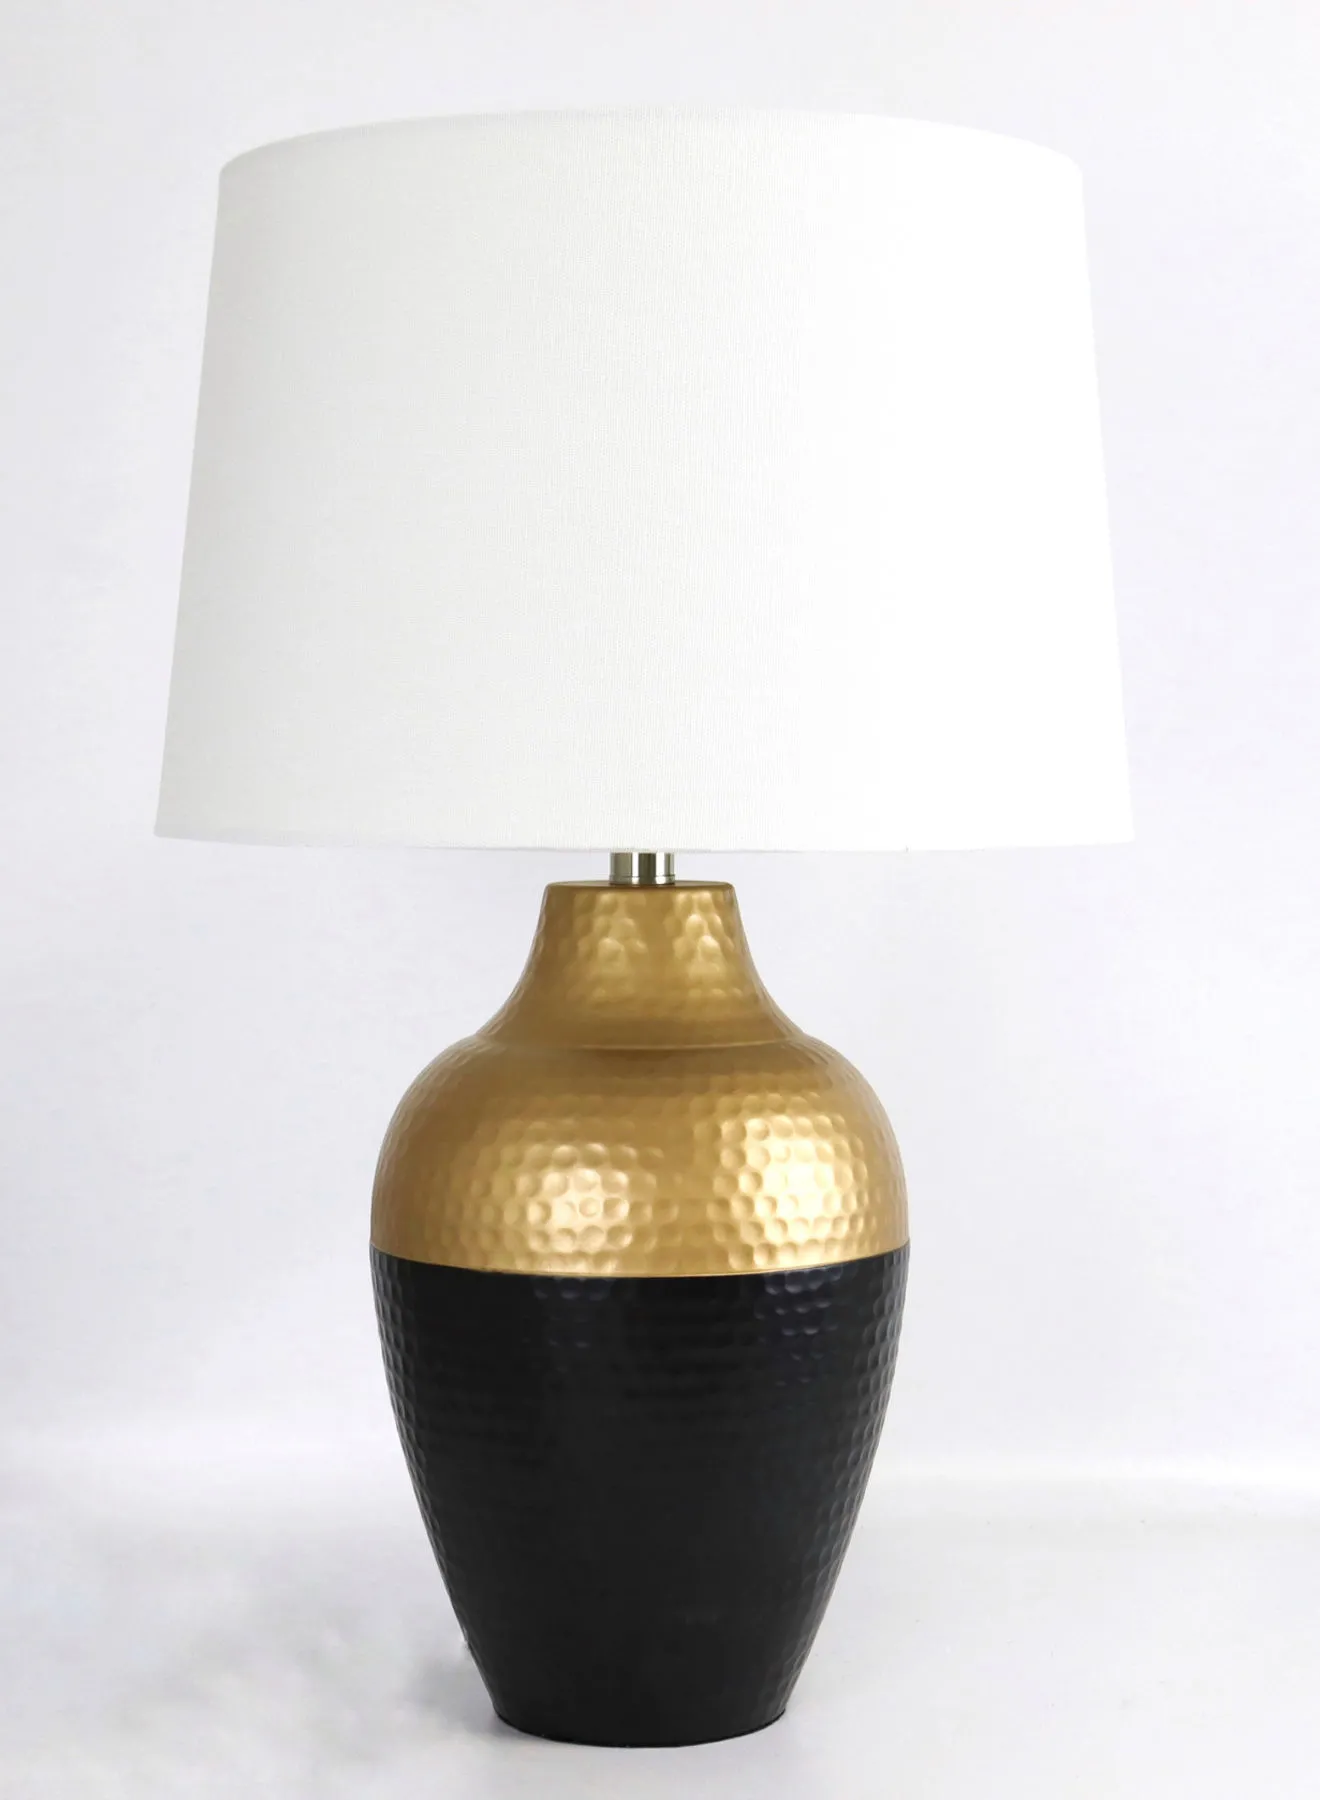 ebb & flow Modern Design Glass Table Lamp Unique Luxury Quality Material for the Perfect Stylish Home RSN71046 Gold/Black 15 x 24